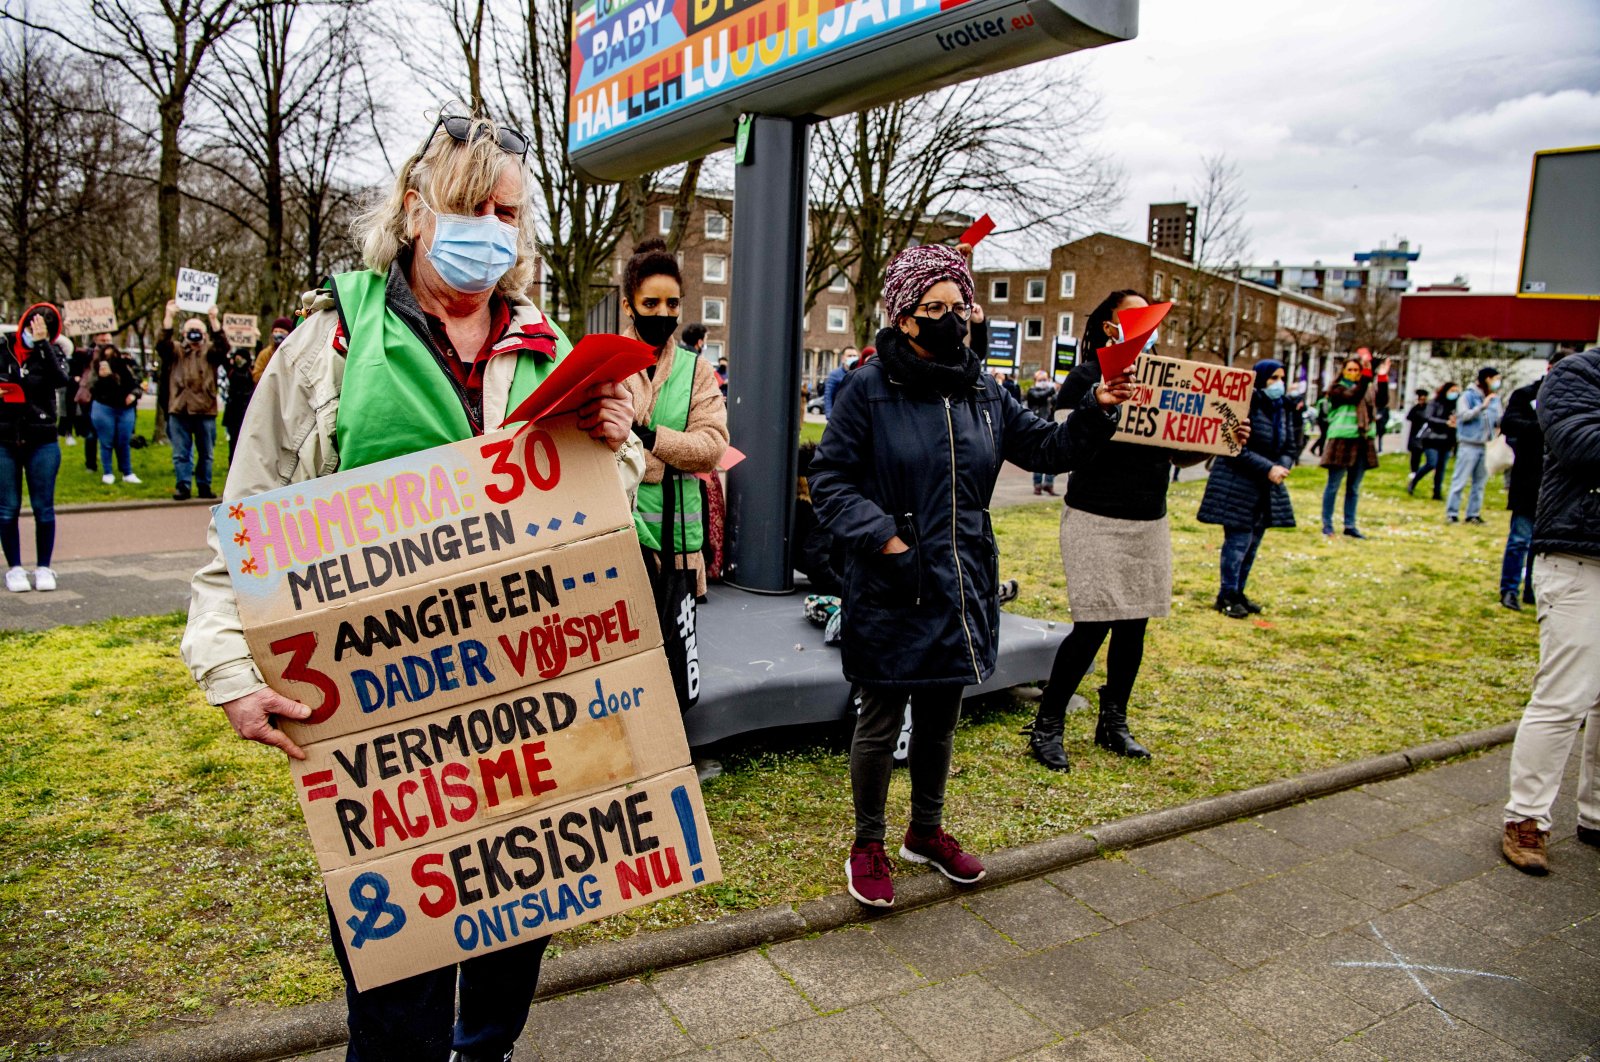 Demonstrators stage a protest against racism at a police station in Rotterdam, the Netherlands, March 28, 2021. (Reuters File Photo)